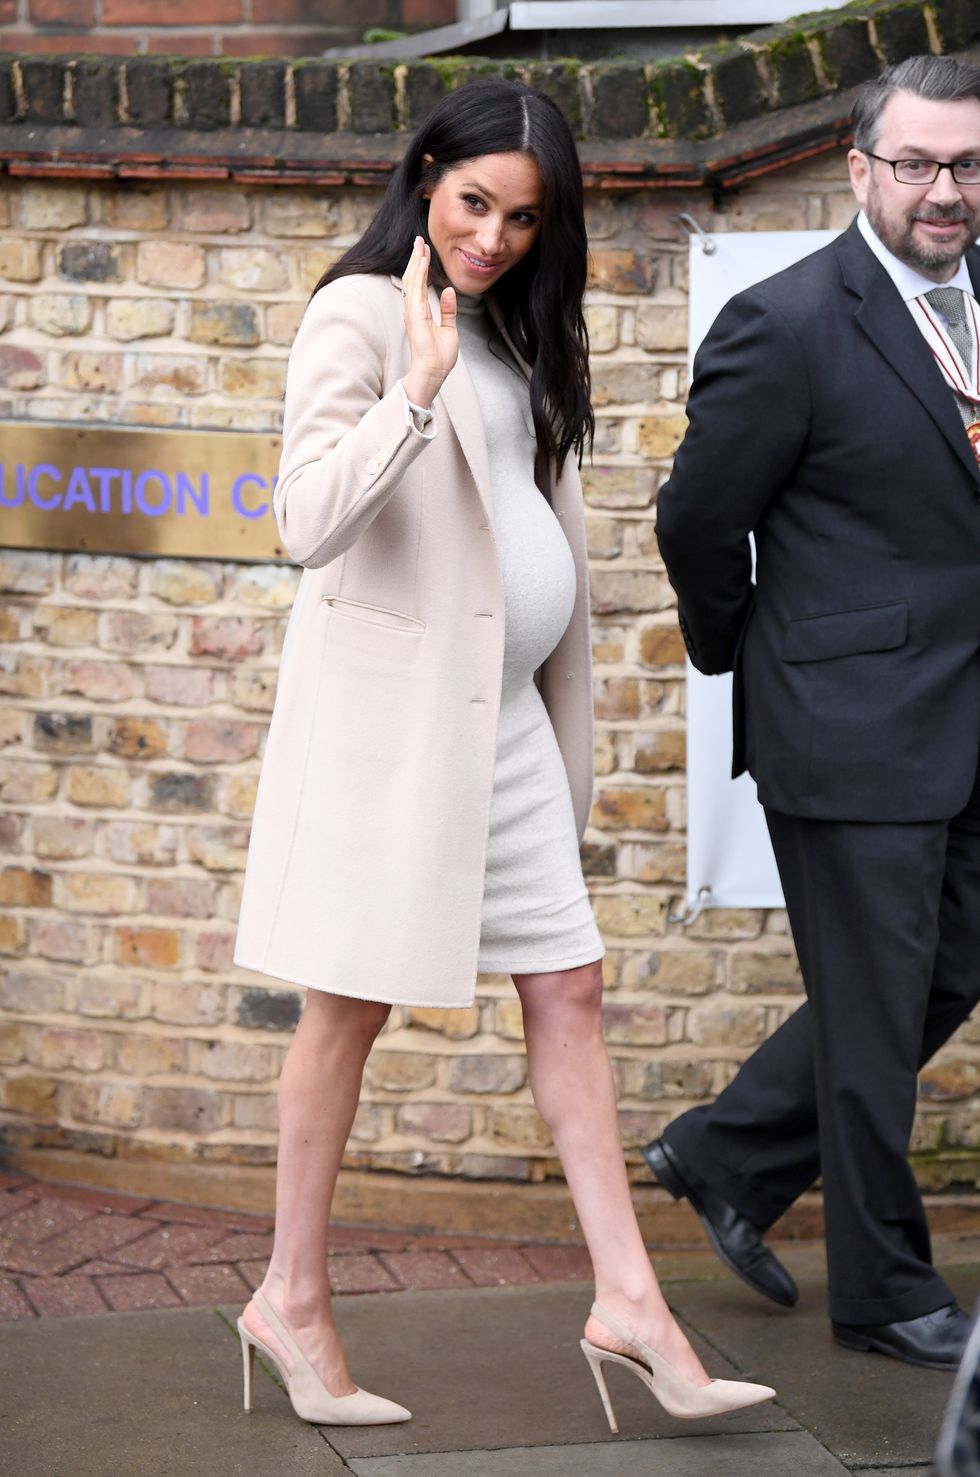 https://hips.hearstapps.com/hmg-prod/images/meghan-duchess-of-sussex-departs-after-visiting-mayhew-news-photo-1083228838-1547656353.jpg?crop=1xw:1xh;center,top&resize=980:*